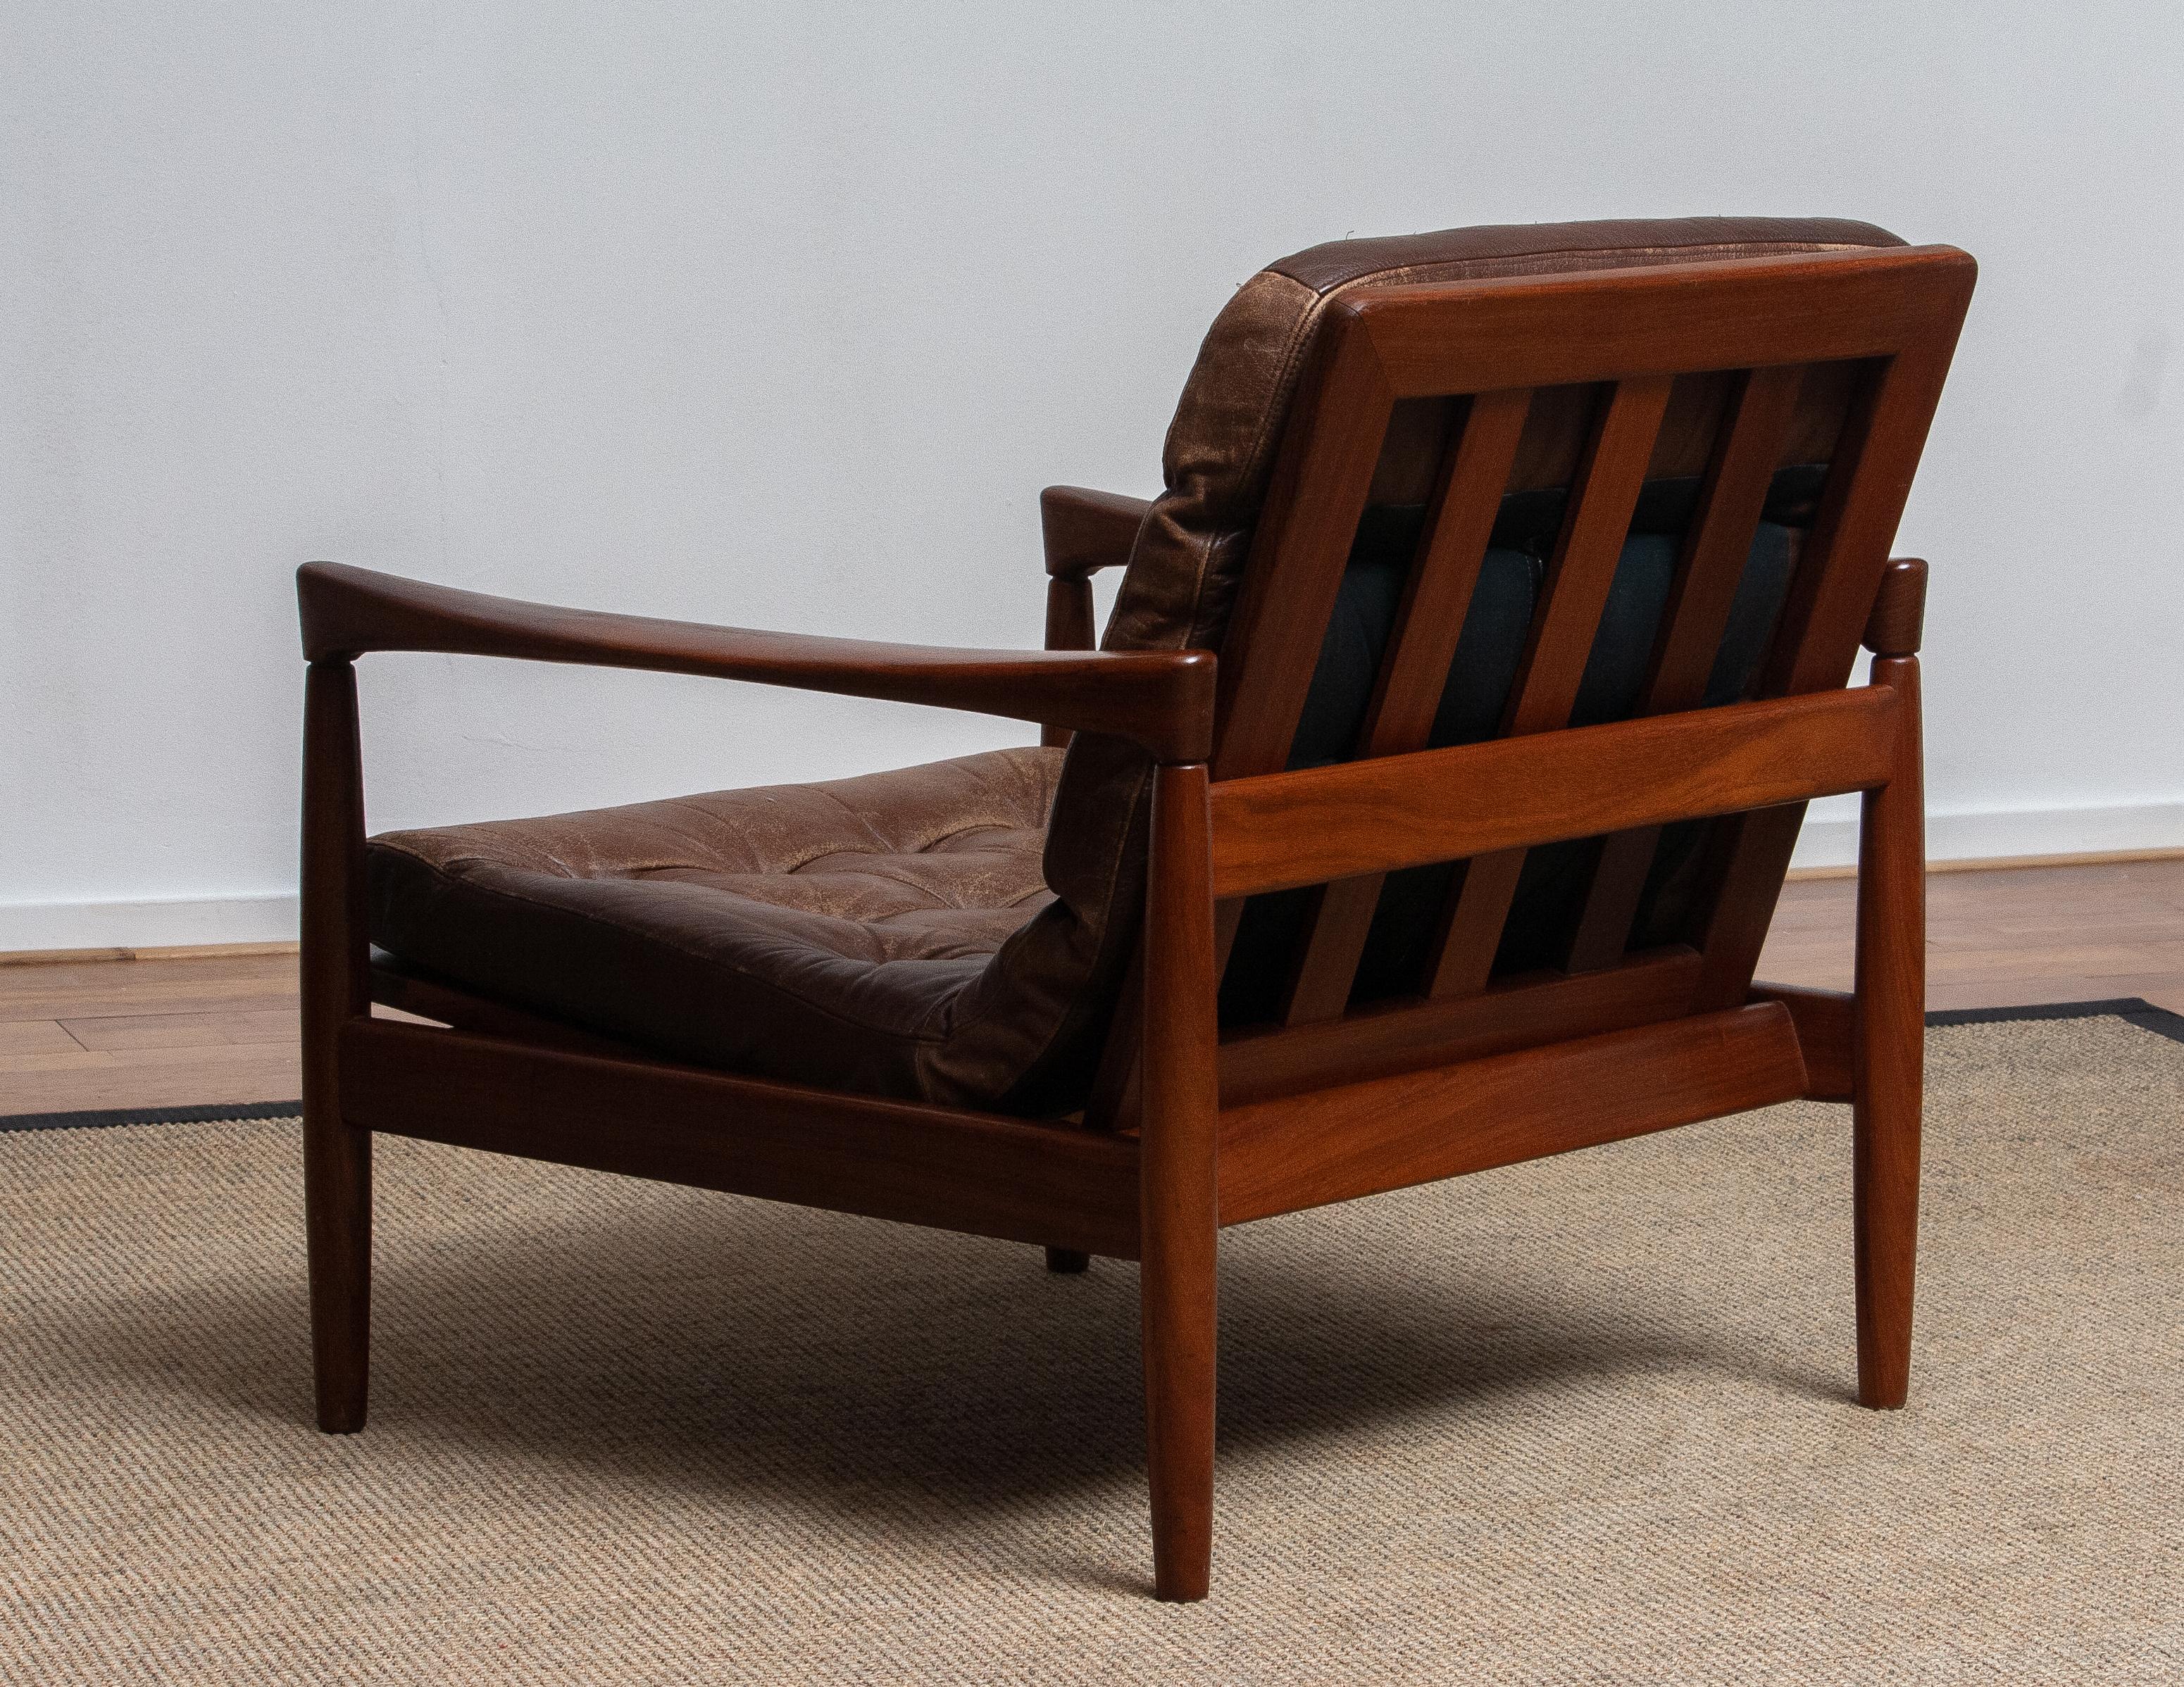 1960s, Teak and Brown Leather Lounge Chair by Erik Wörtz for Bröderna Anderssons 2